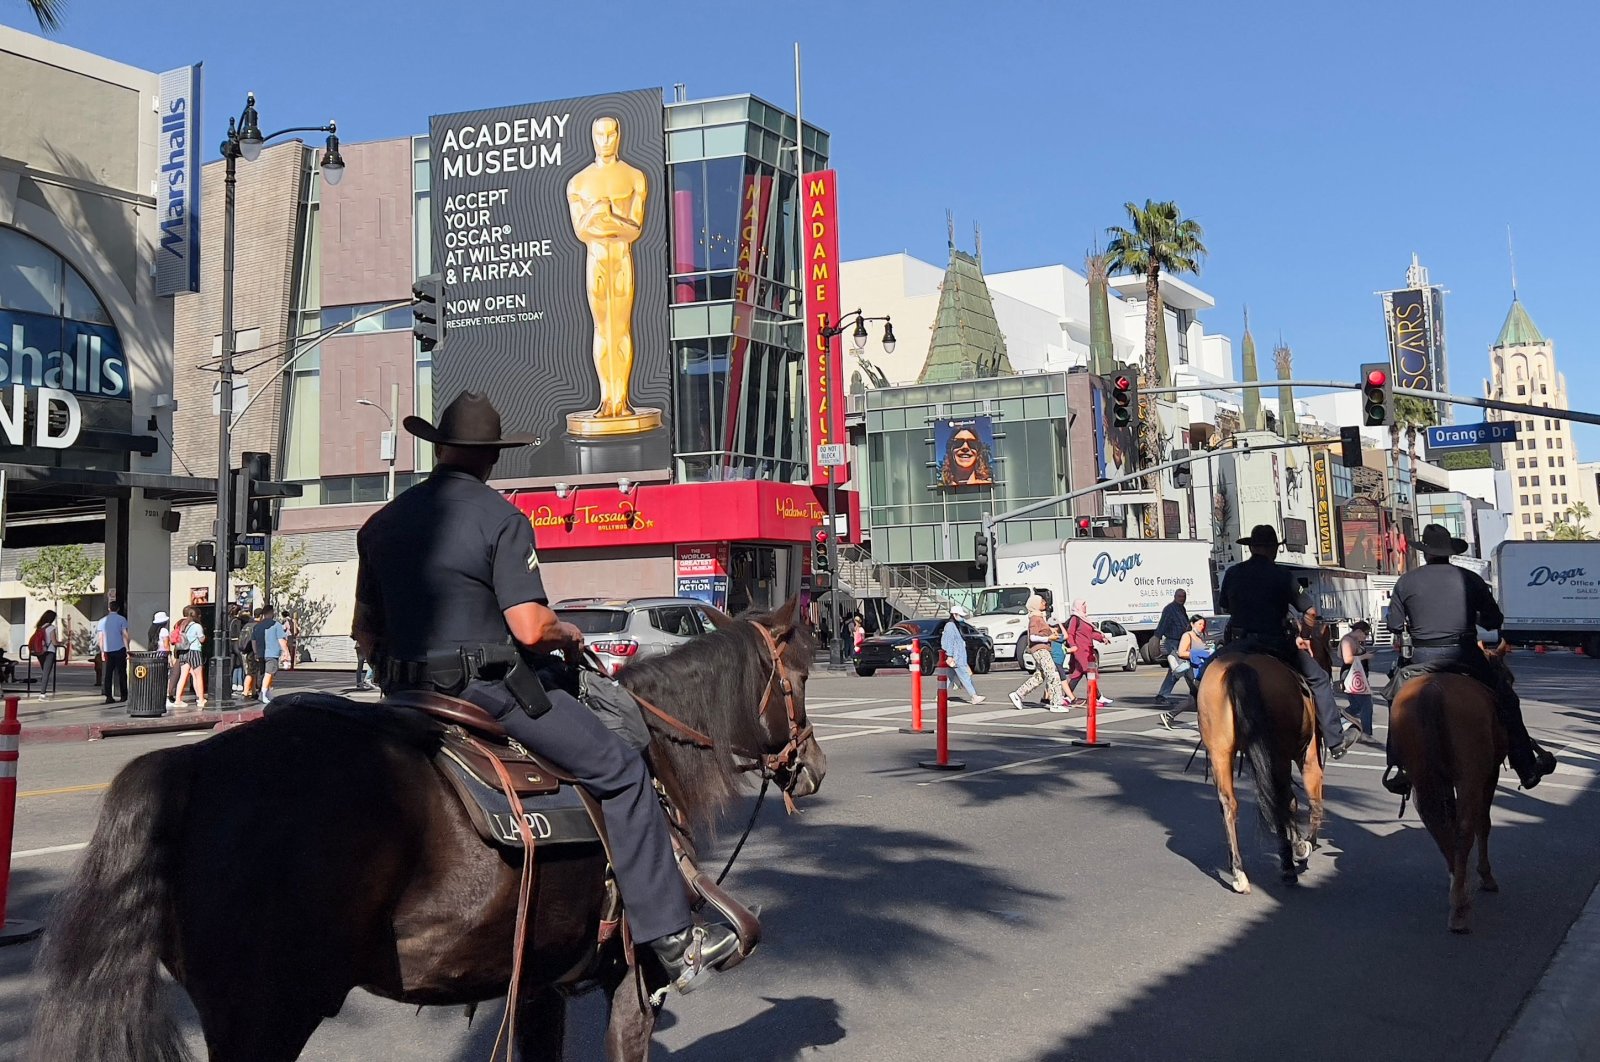 Los Angeles Police Officers (LAPD) are seen patrolling Hollywood Boulevard on horses as the city gets ready for the 94th Academy Awards in Hollywood, California on March 23, 2022. (AFP)